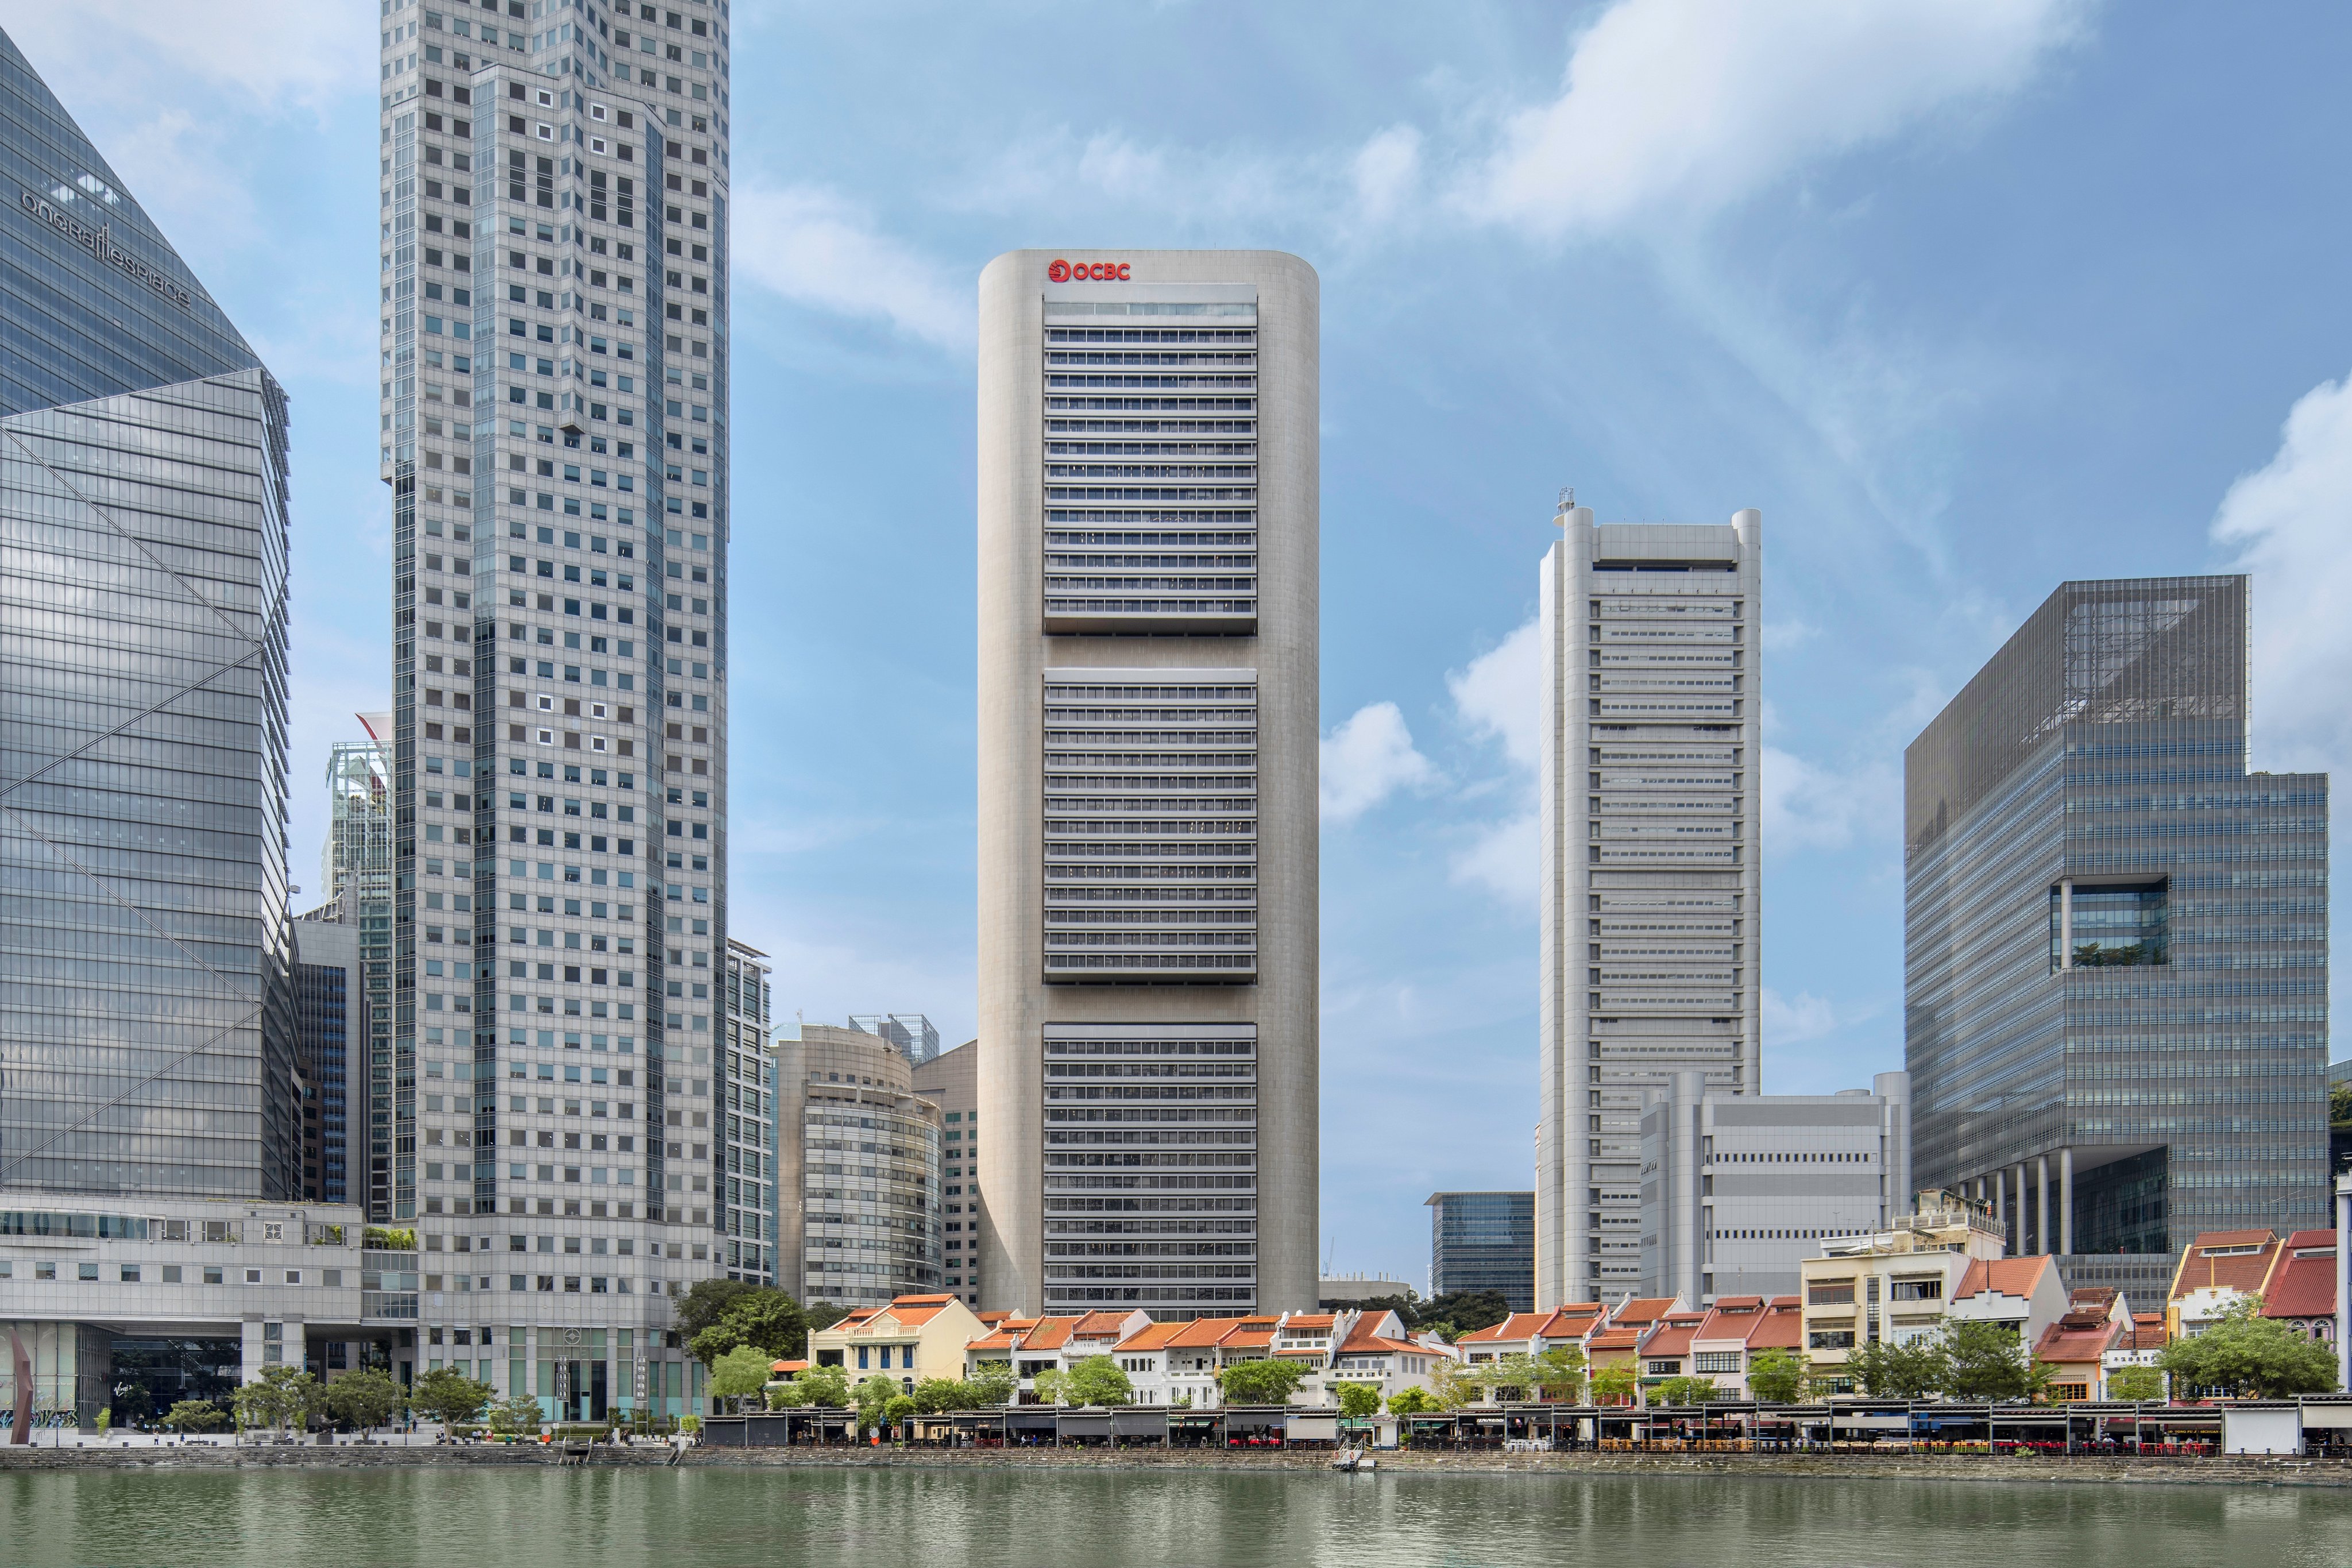 OCBE Centre, the headquarters of OCBC Group, was designed by architect I. M. Pei. Photo: Handout